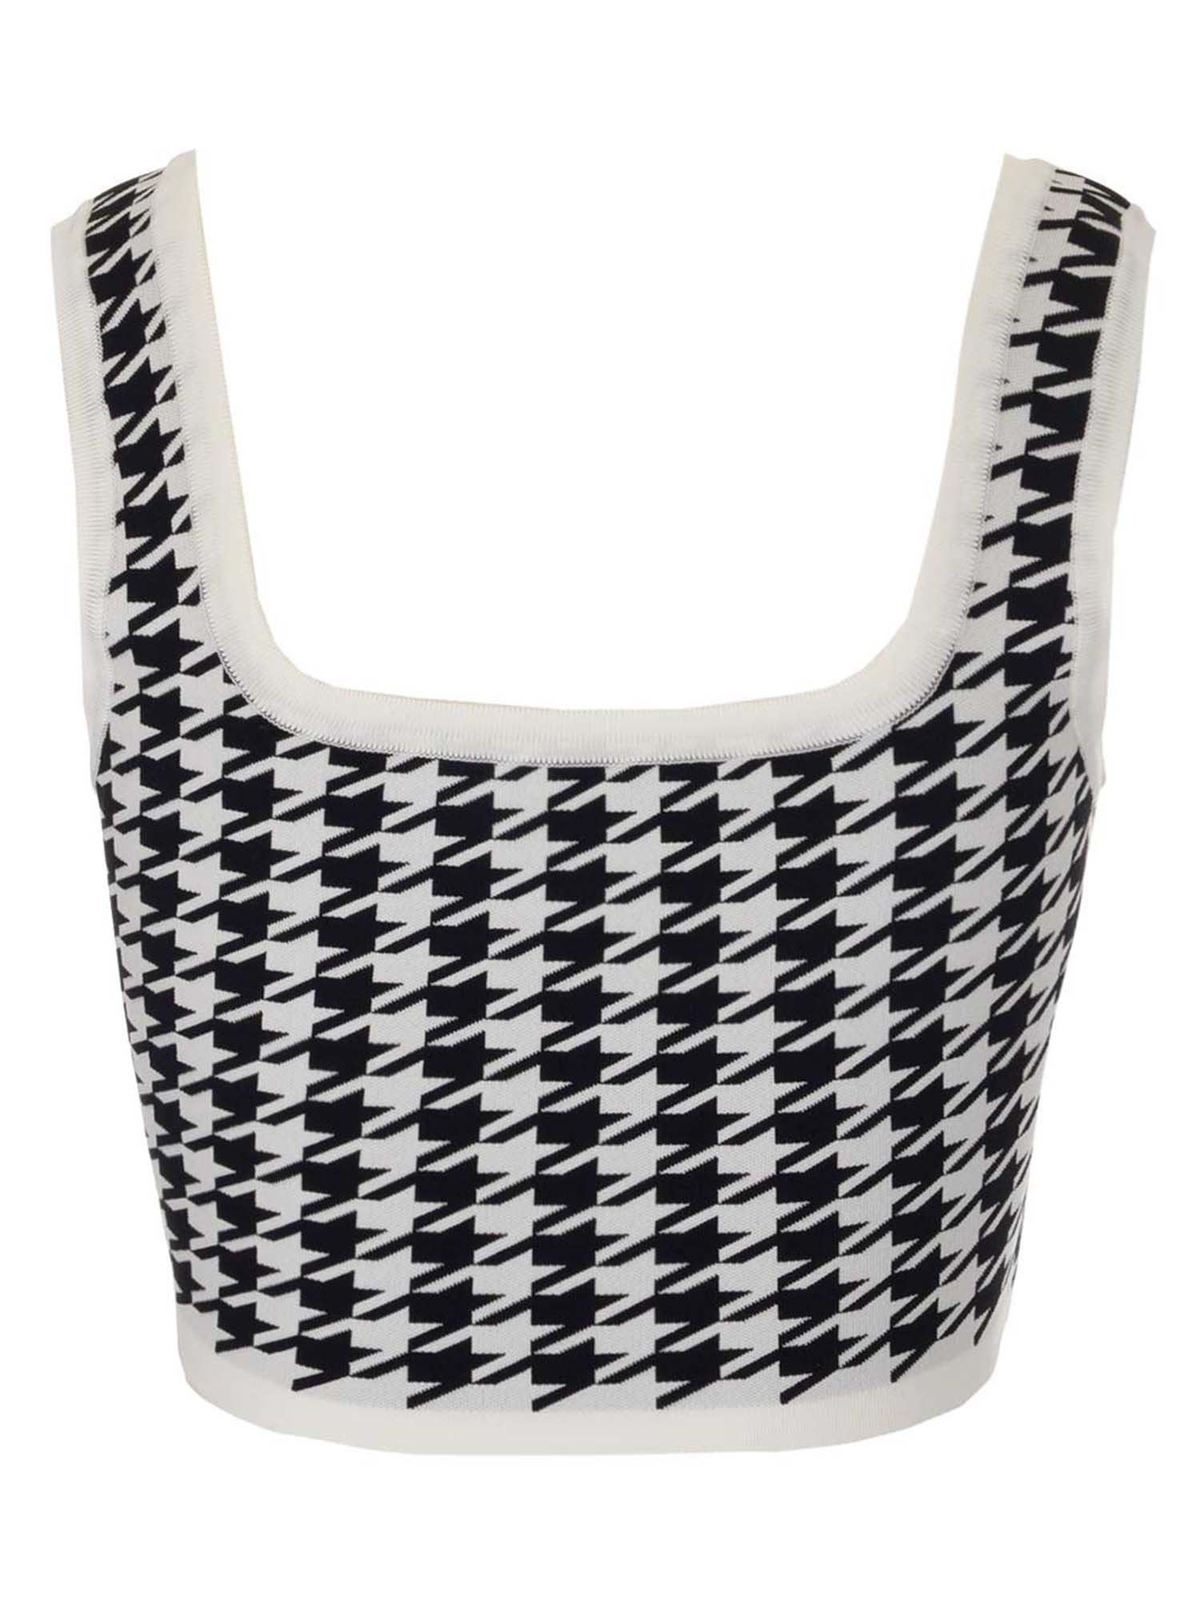 Tops & shirts Balmain - Houndstooth crop top in black and white ...